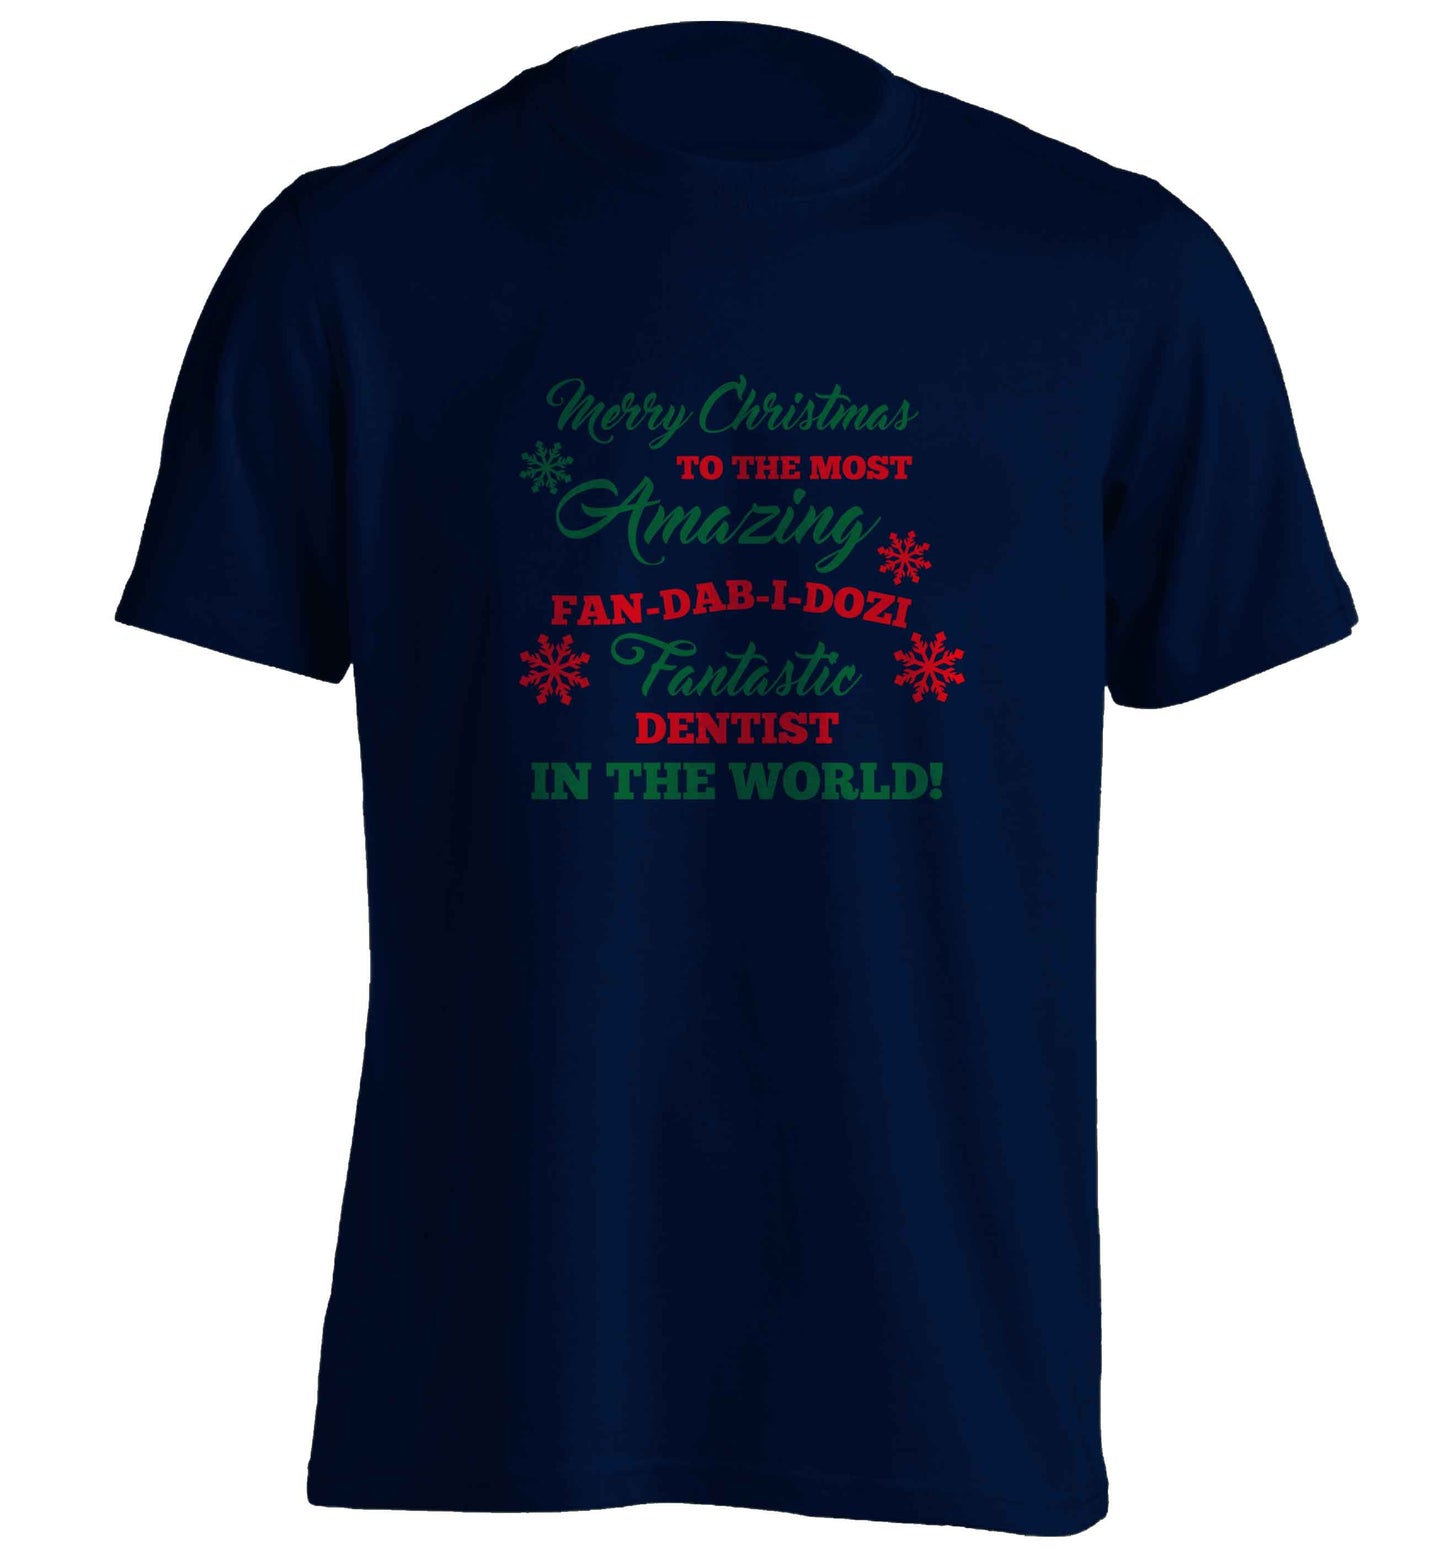 Merry Christmas to the most amazing dentist in the world! adults unisex navy Tshirt 2XL